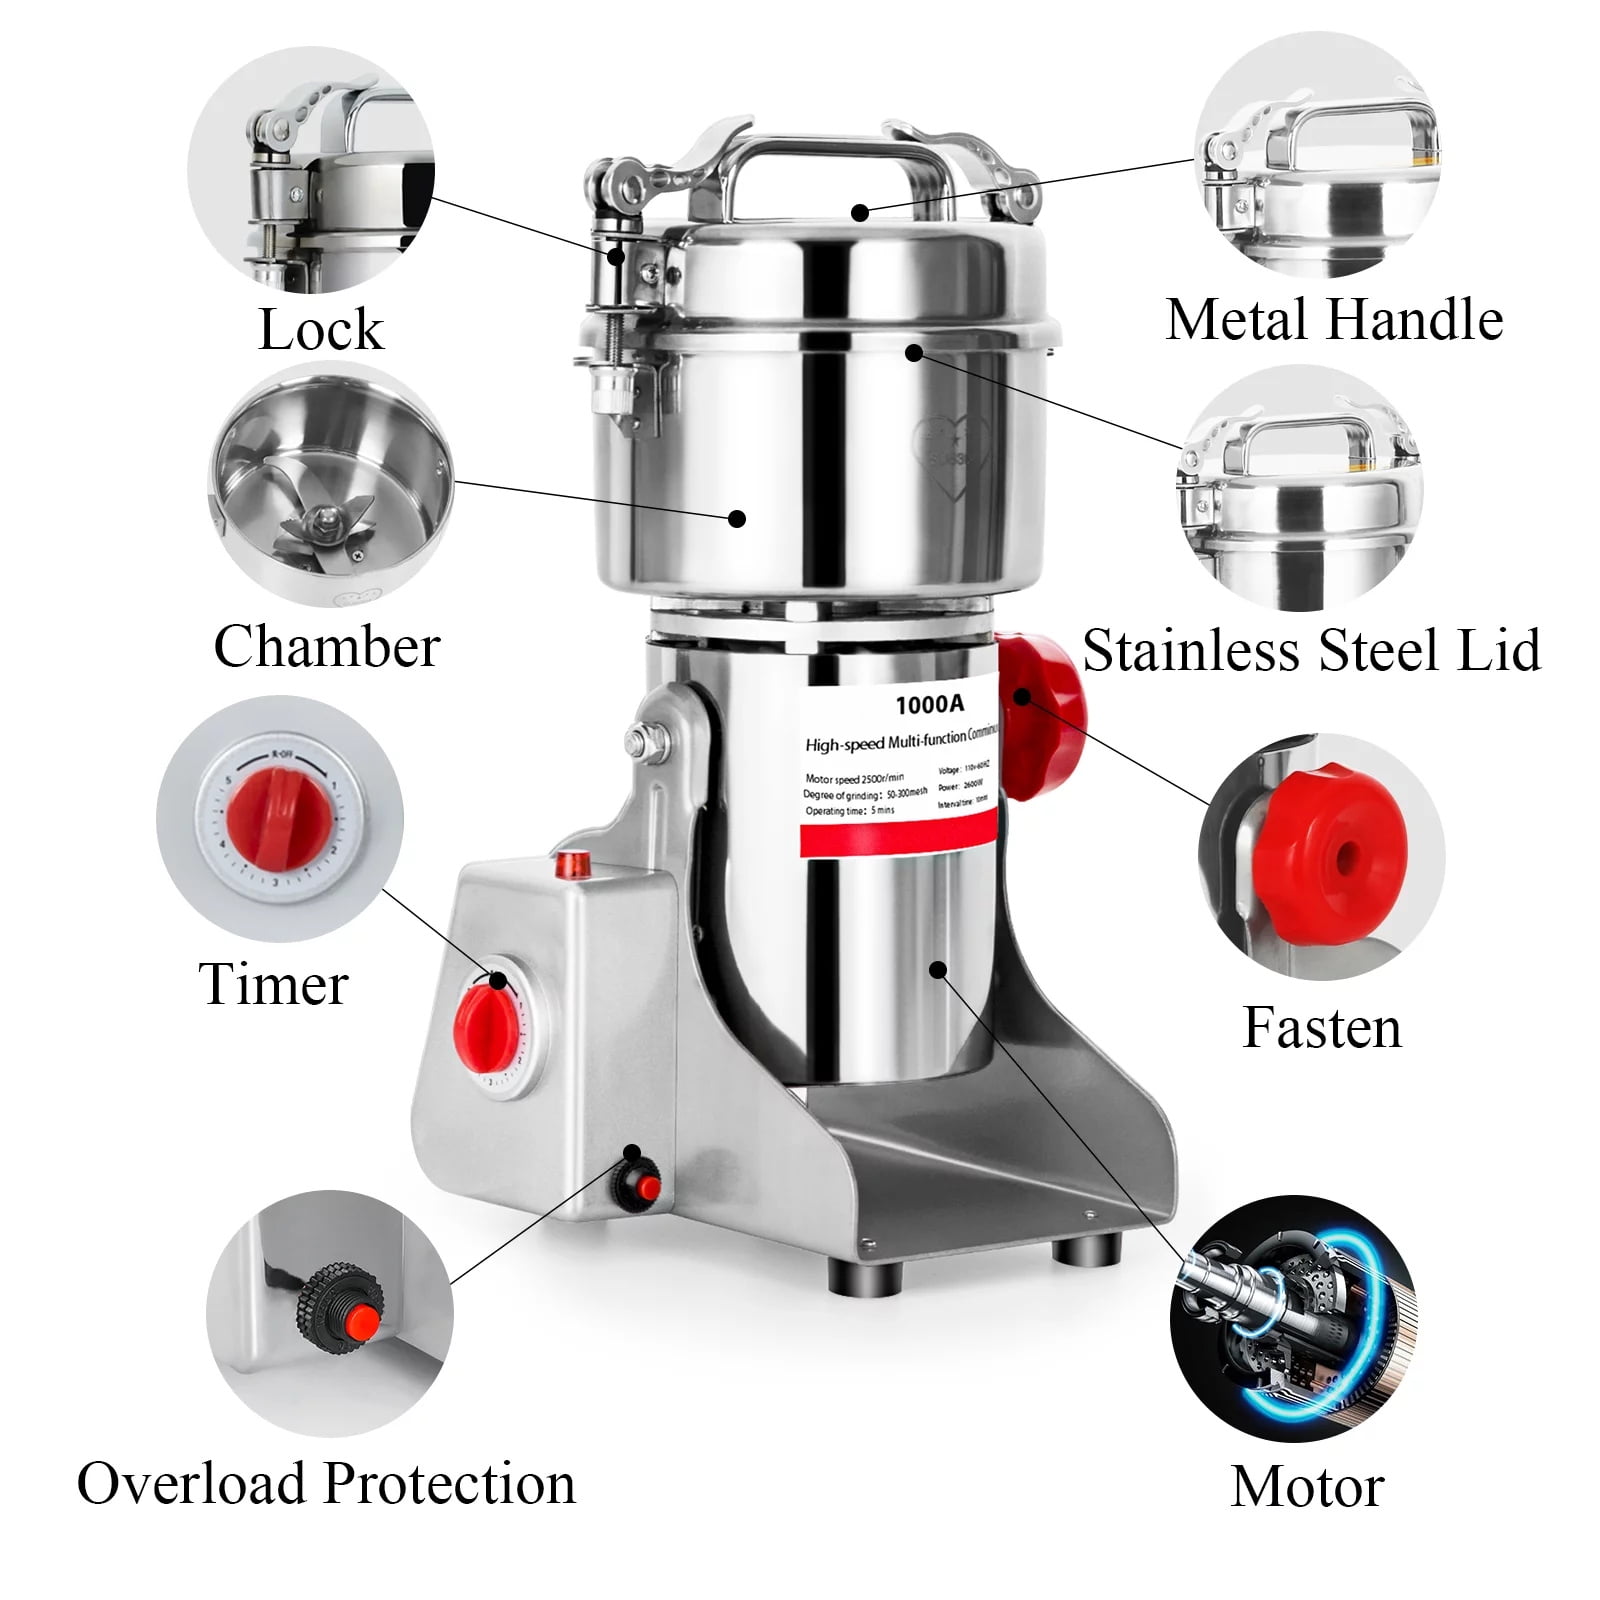 2500g Electric Grain Mill Grinder Spice Commercial 4000W 110V Superfine Powder Grinding Pulverizer Domccy